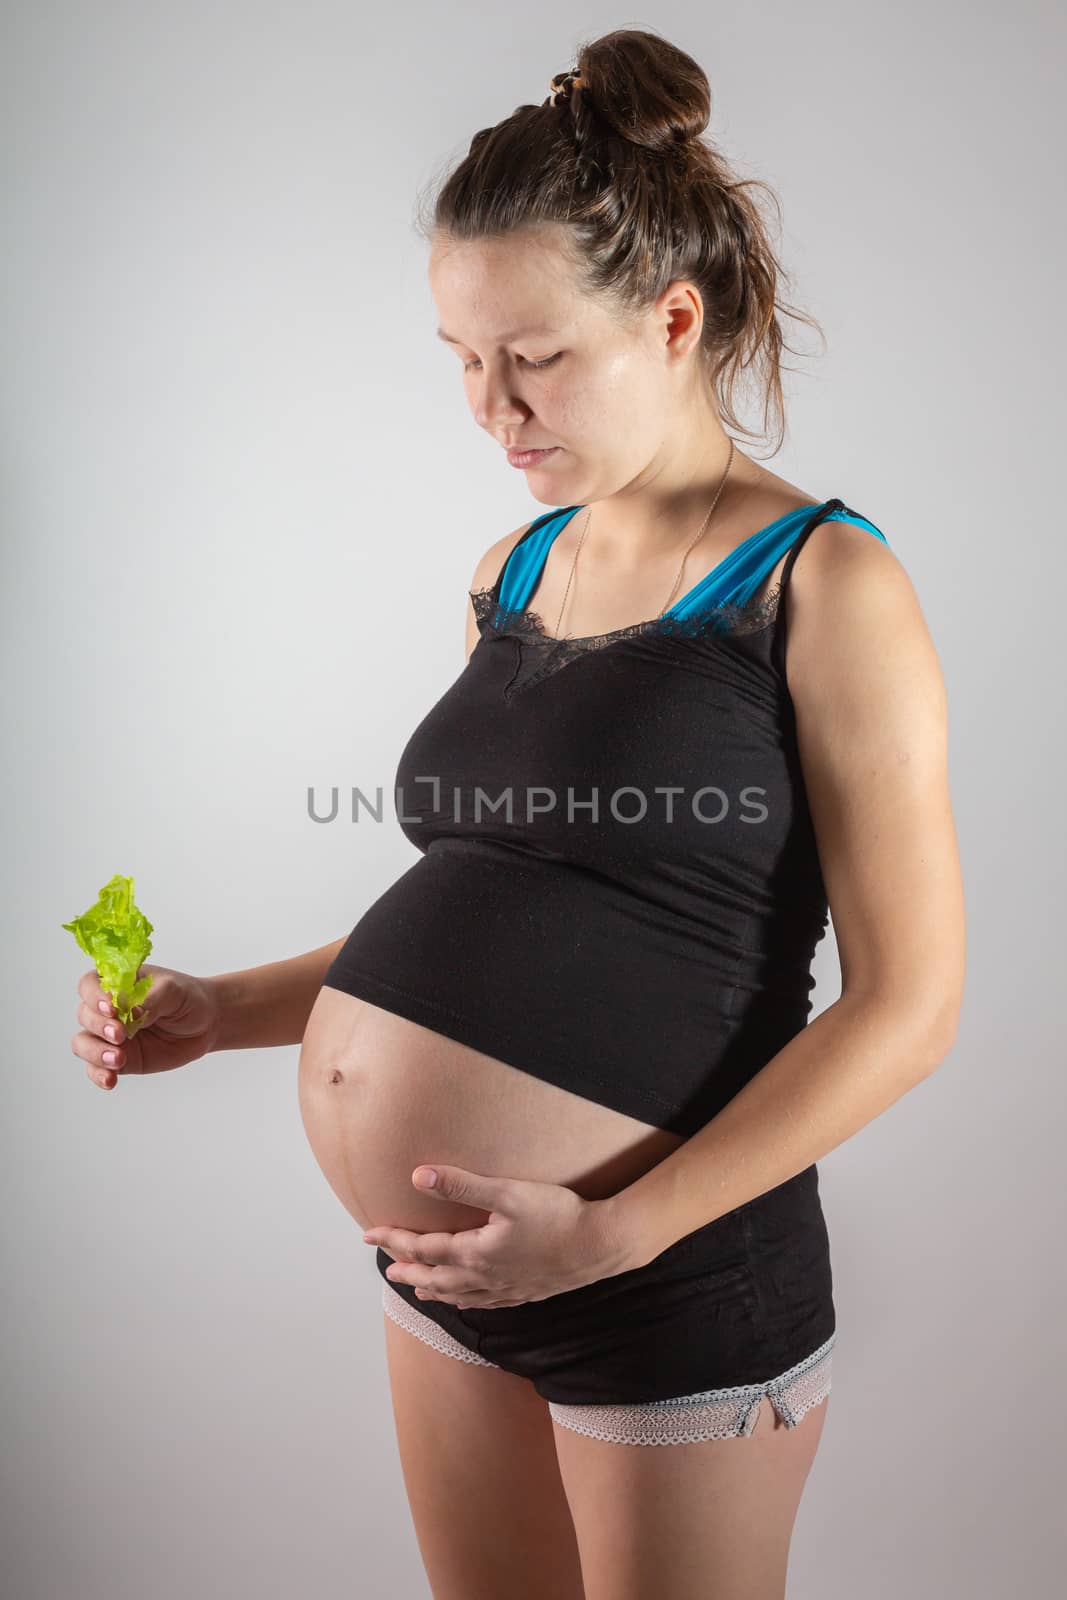 Pregnant woman holding glass bowl with fresh salad